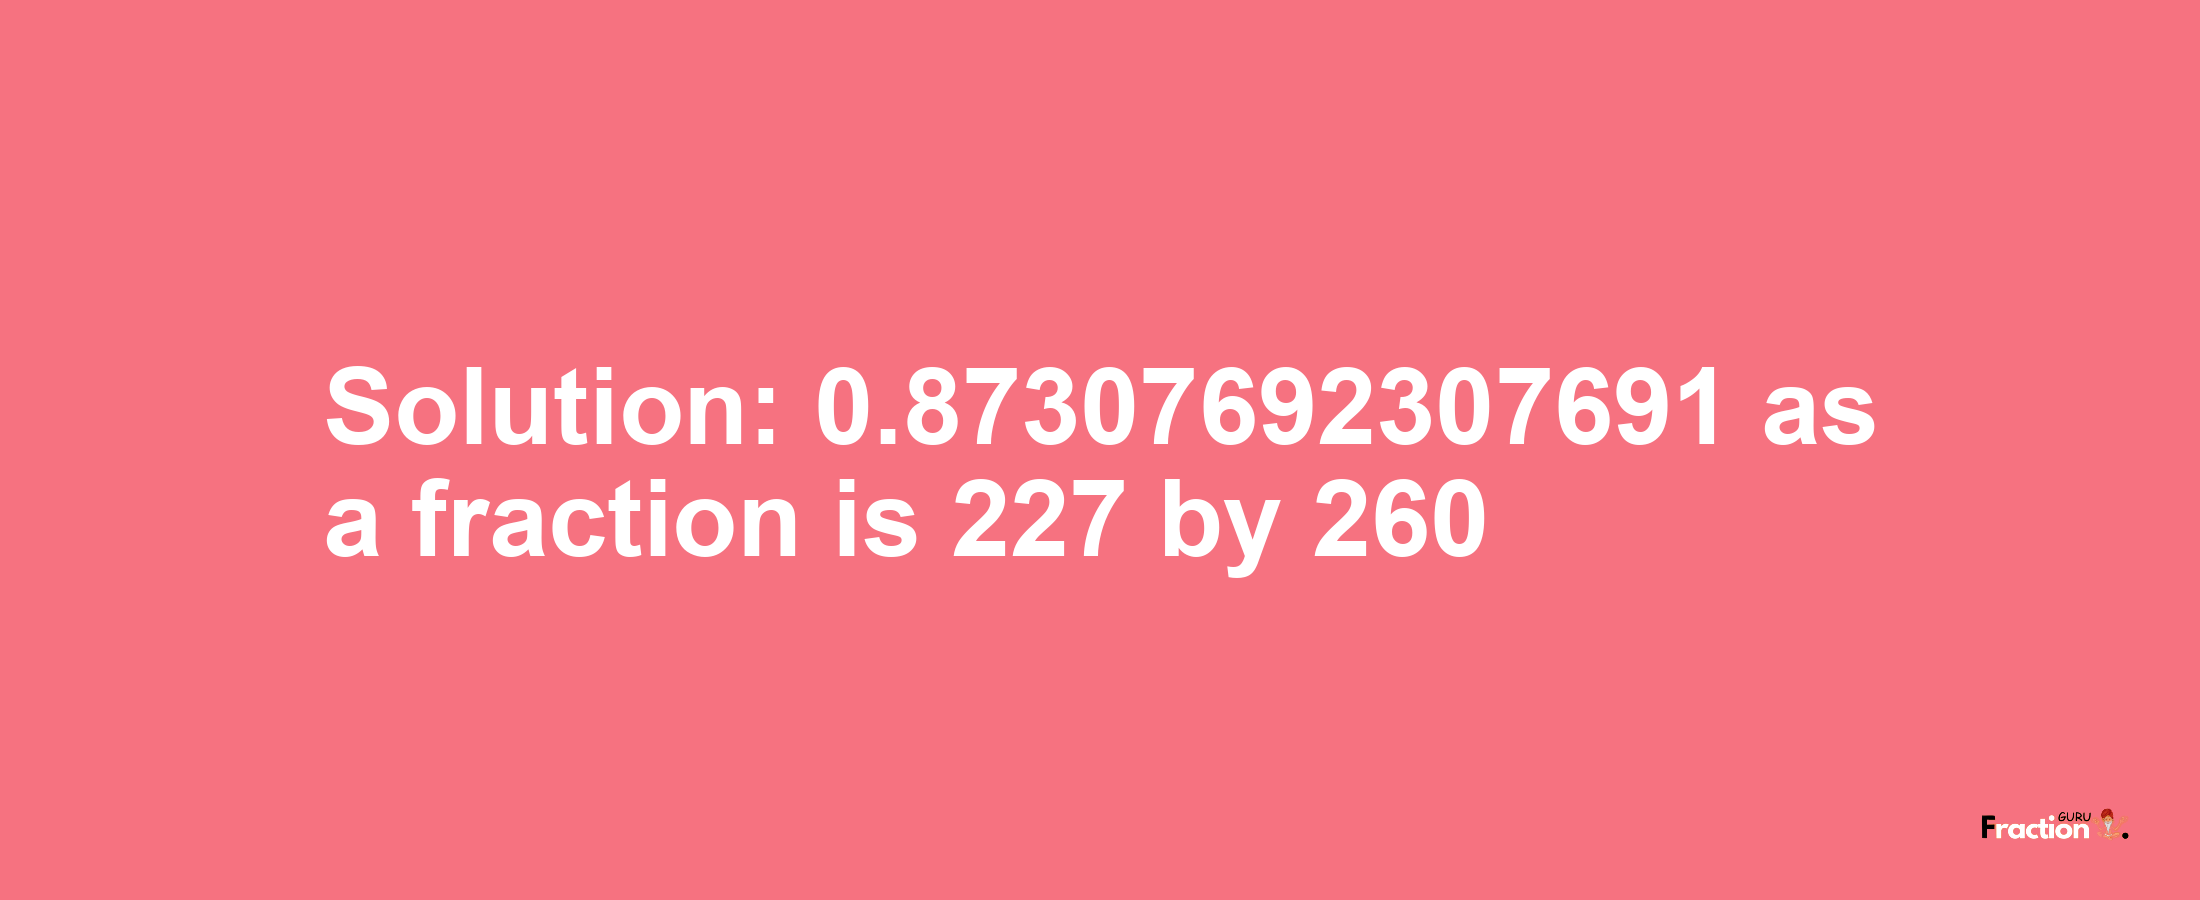 Solution:0.87307692307691 as a fraction is 227/260